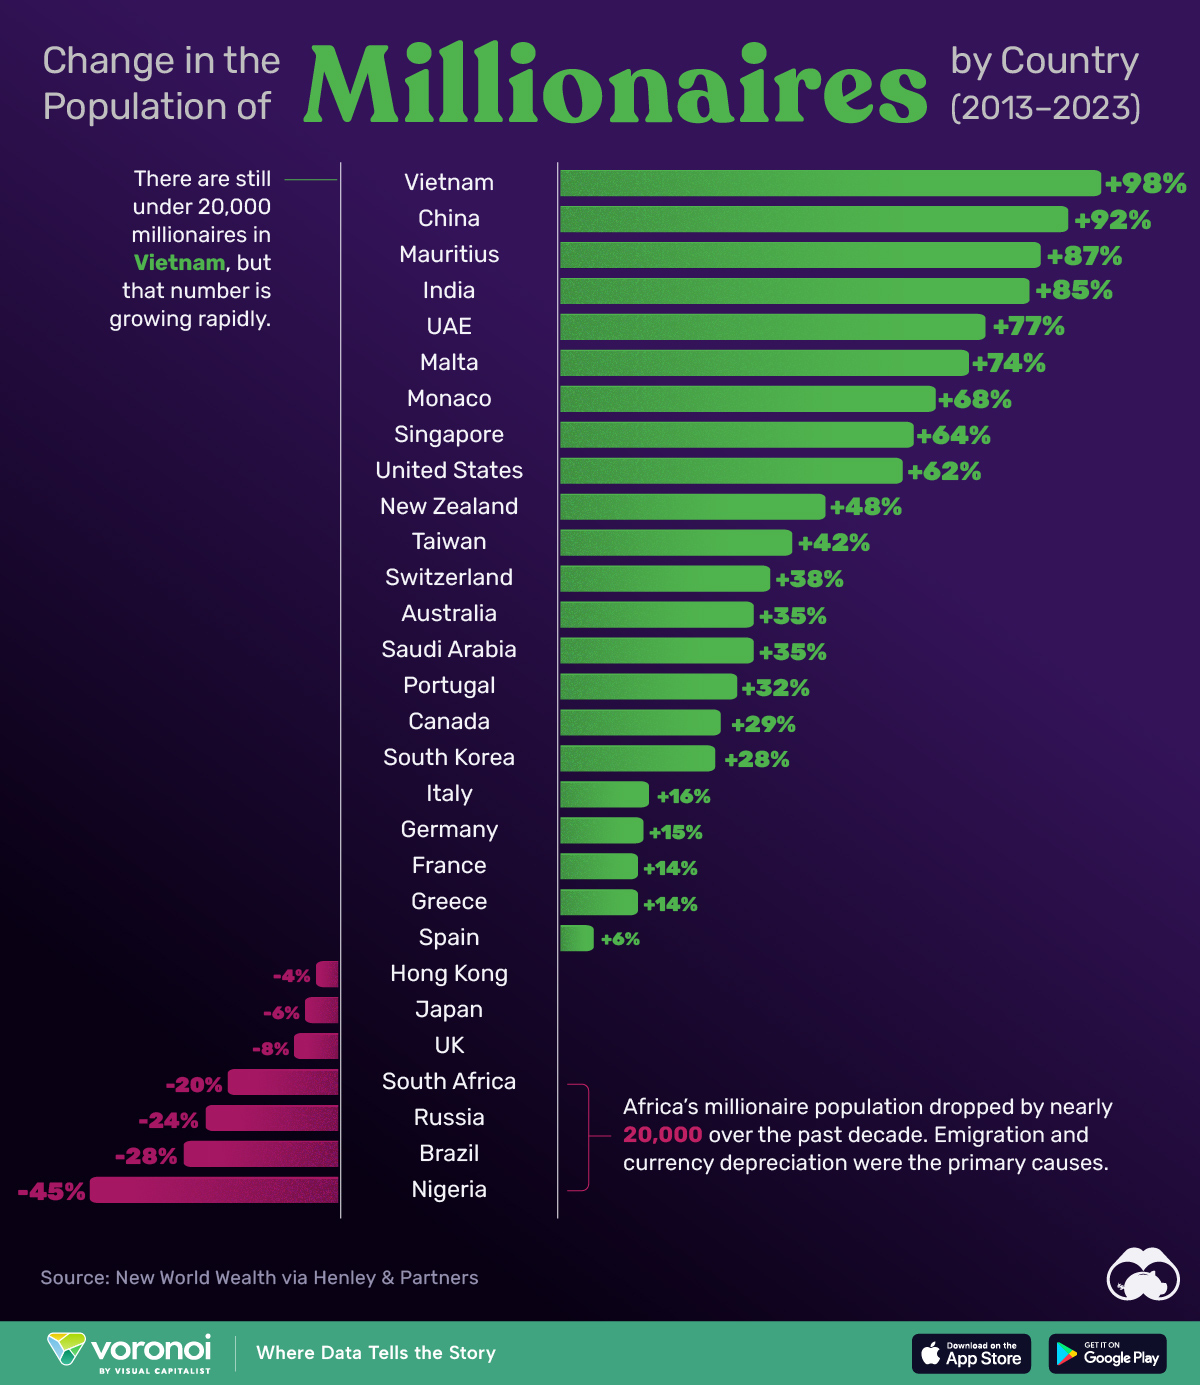 The Fastest Growing Millionaire Populations, by Country (2013-2023)